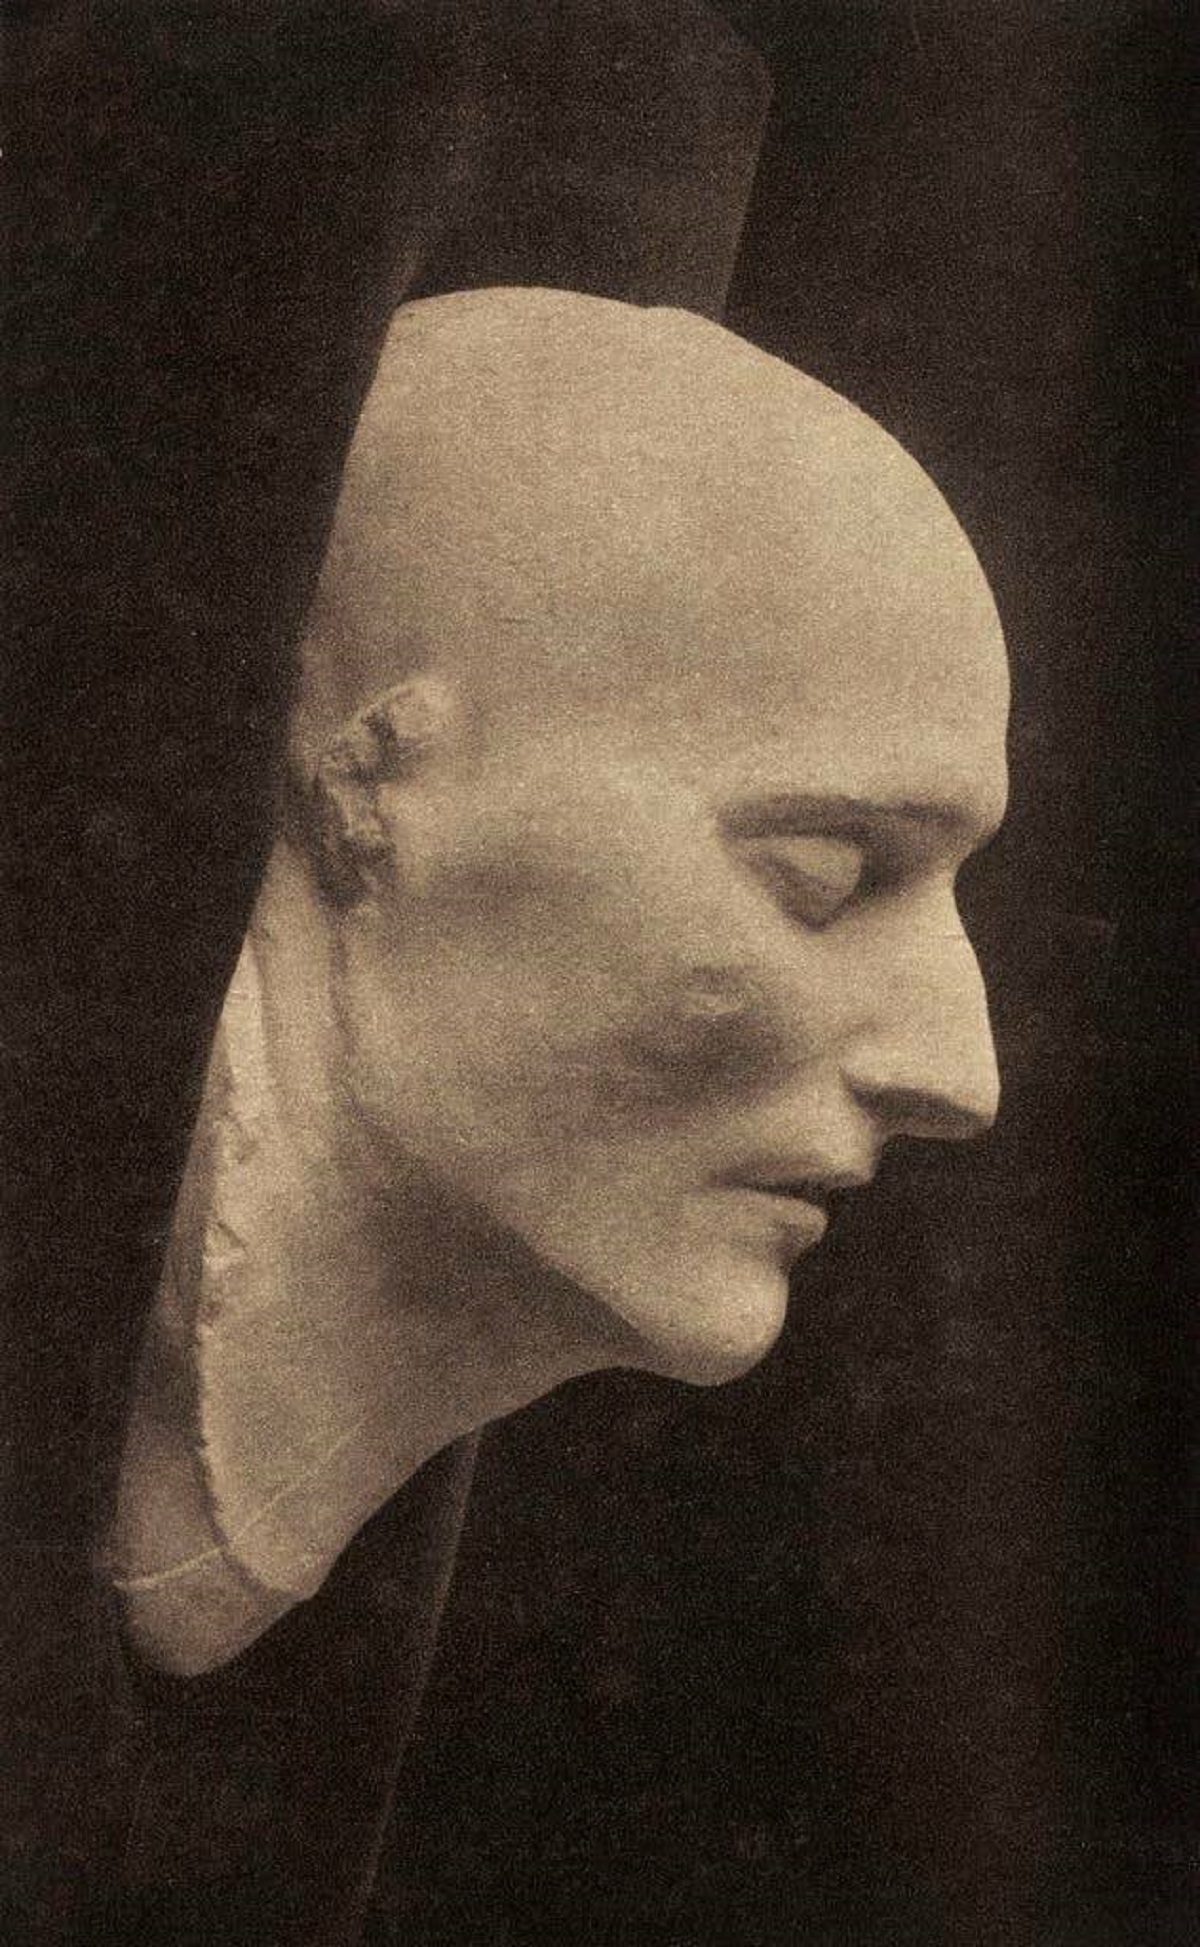 In the hours after he died, a death mask was made of Napoleon Bonaparte's face: